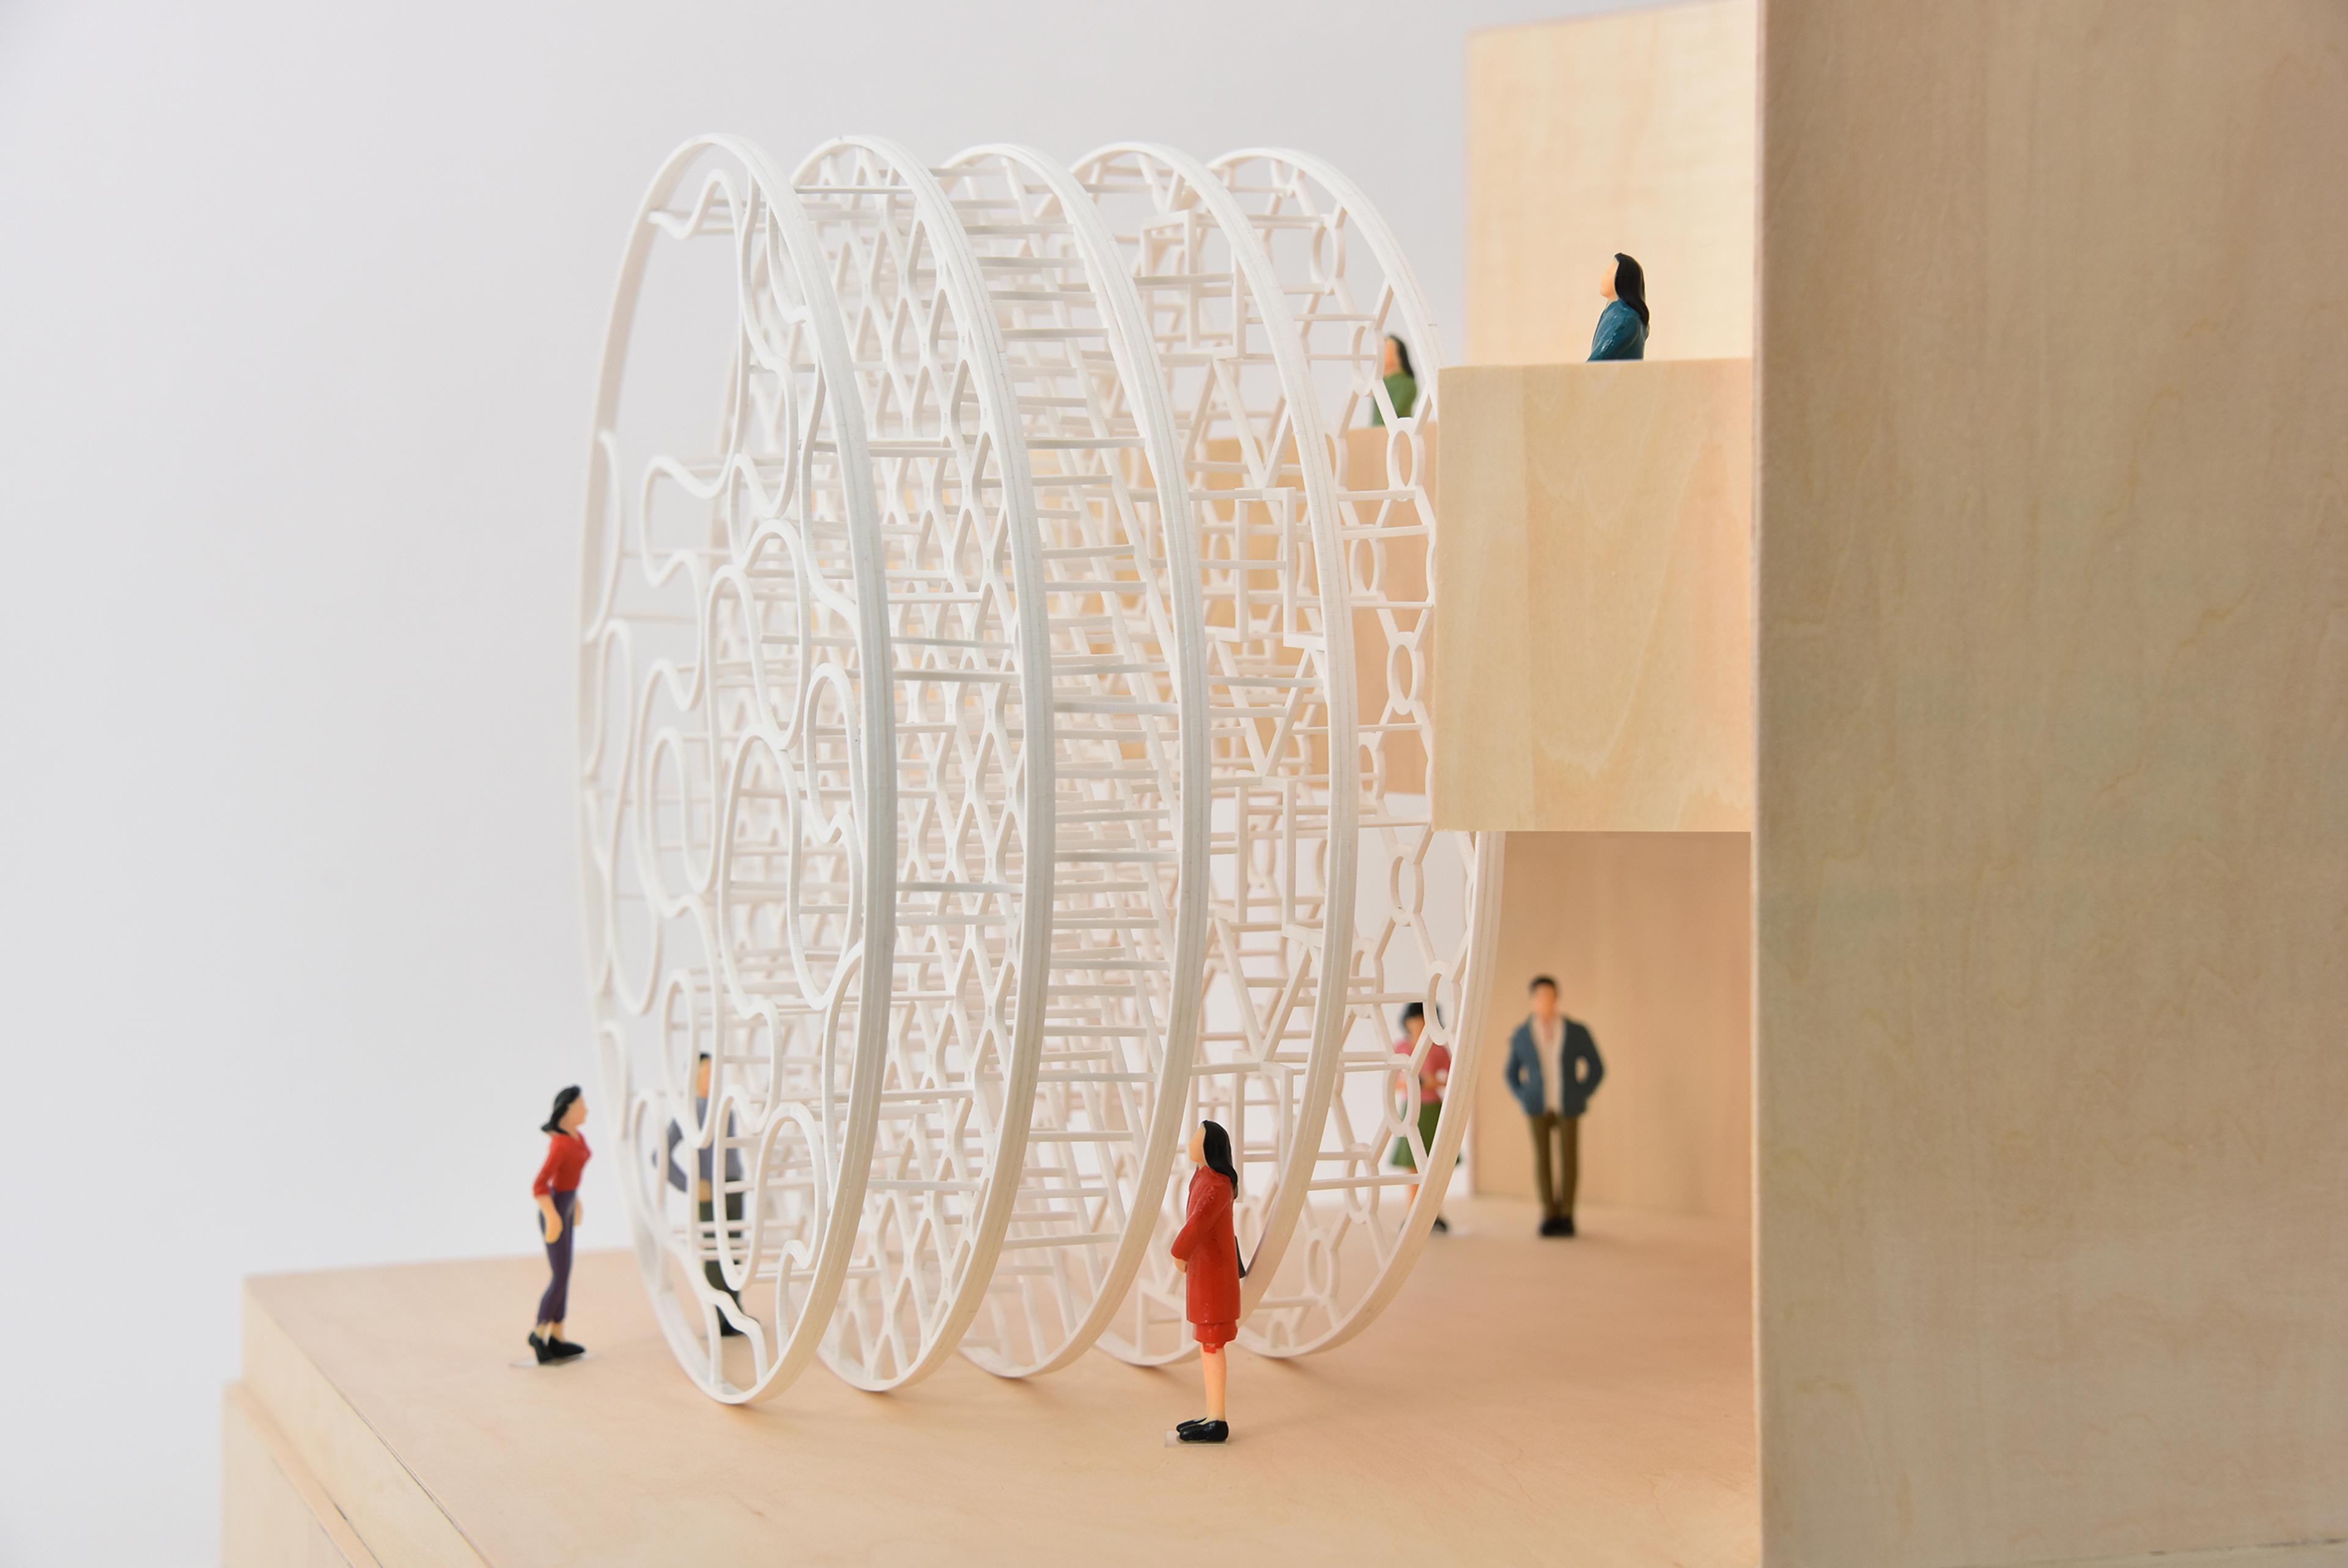 Architectural model of a mesh installation